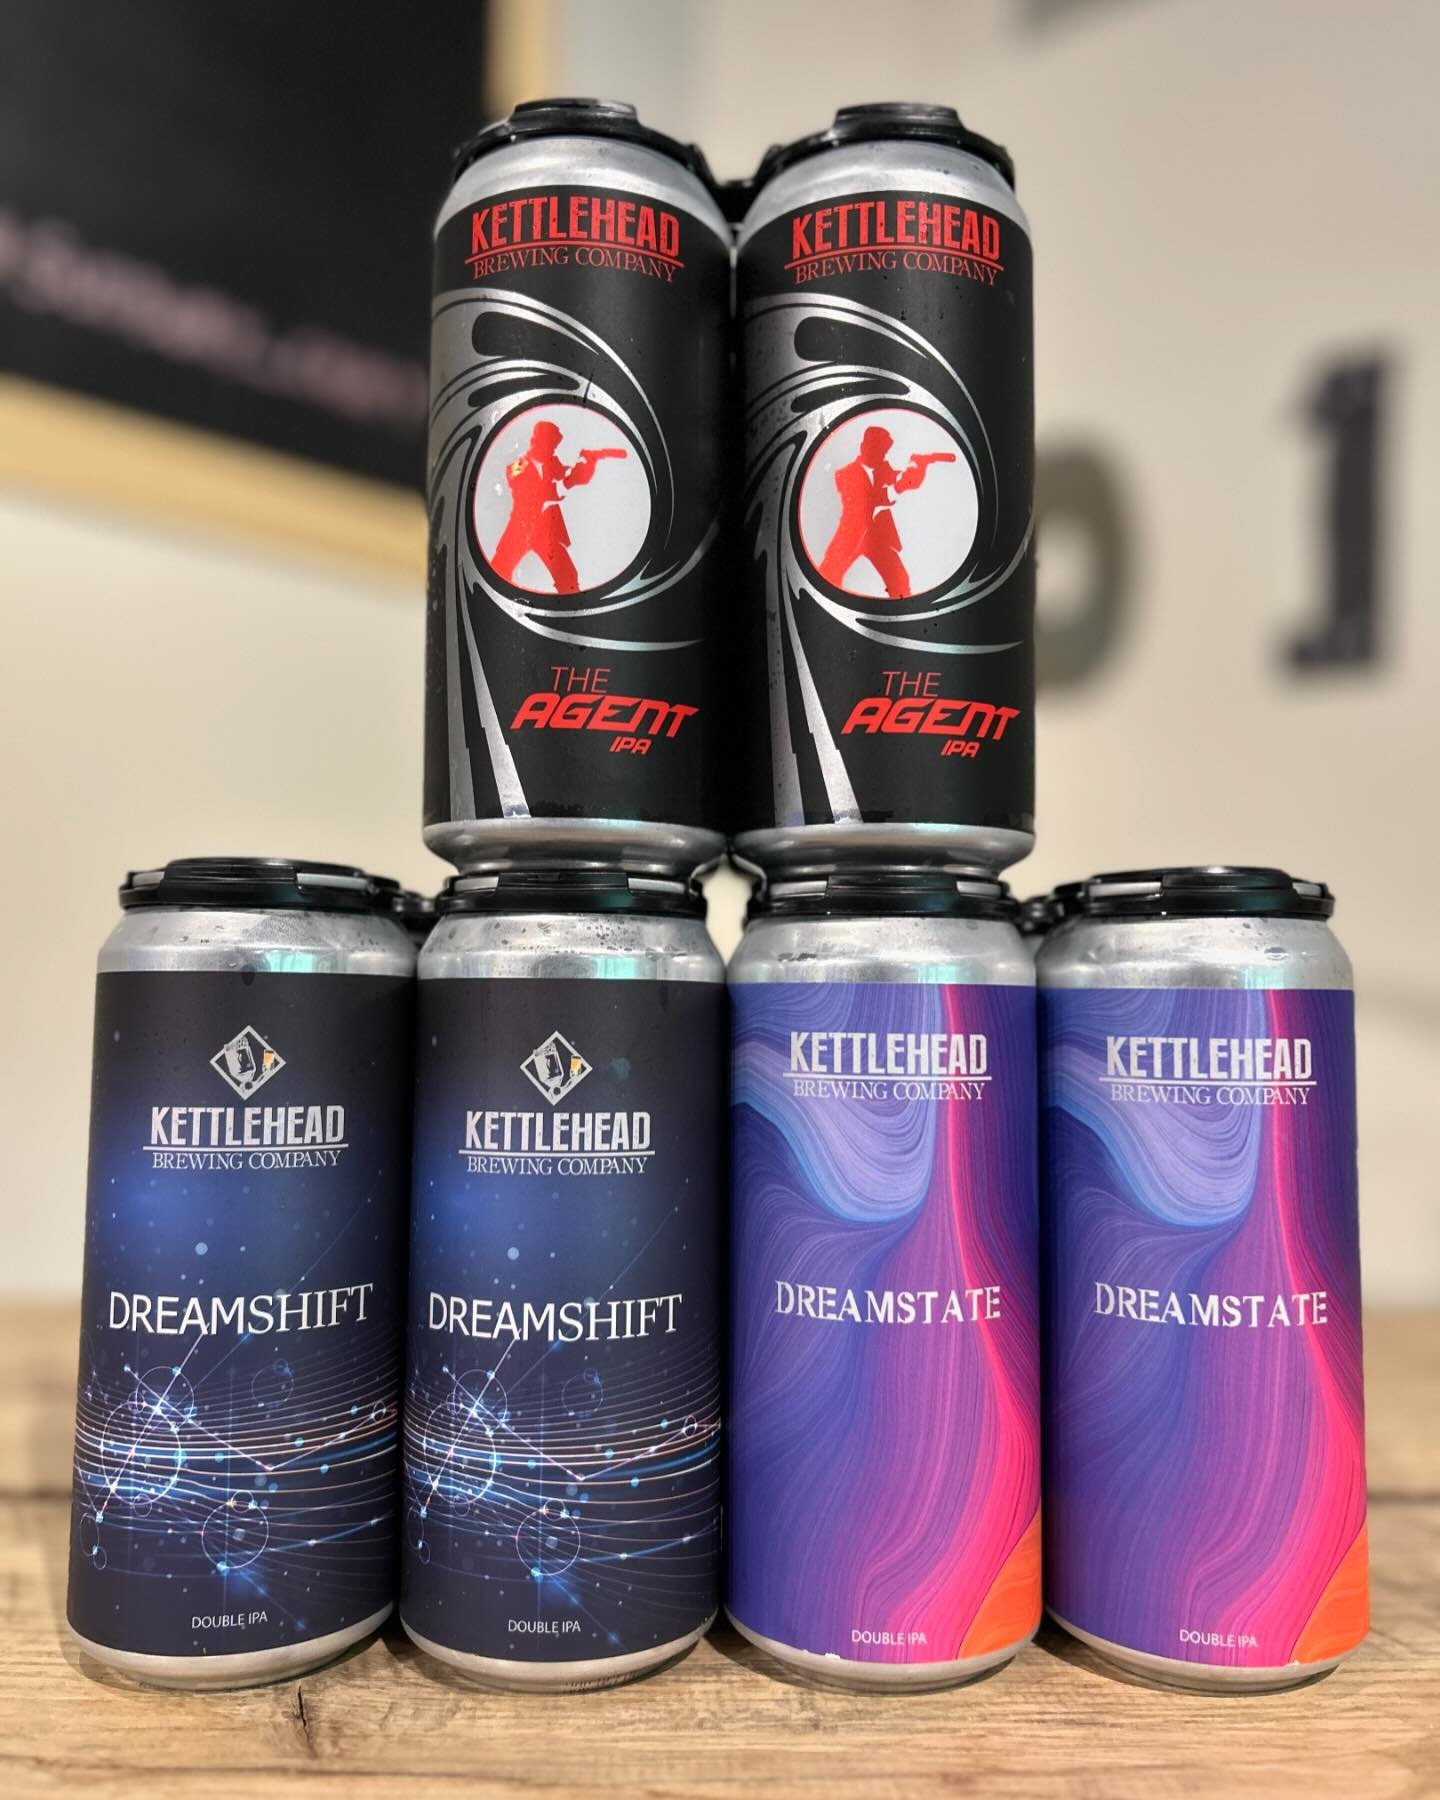 Freshy @kettleheadbrewing #NowAvailable #SudburyCraftBeer #SudburyMA
&mdash;
The Agent // IPA // 7% ABV

Our flagship IPA. Hopped exclusively with Citra, bright notes of tangerine and candied orange hit as smooth as the wind⁣⁣.
&mdash;
Dreamshift // 